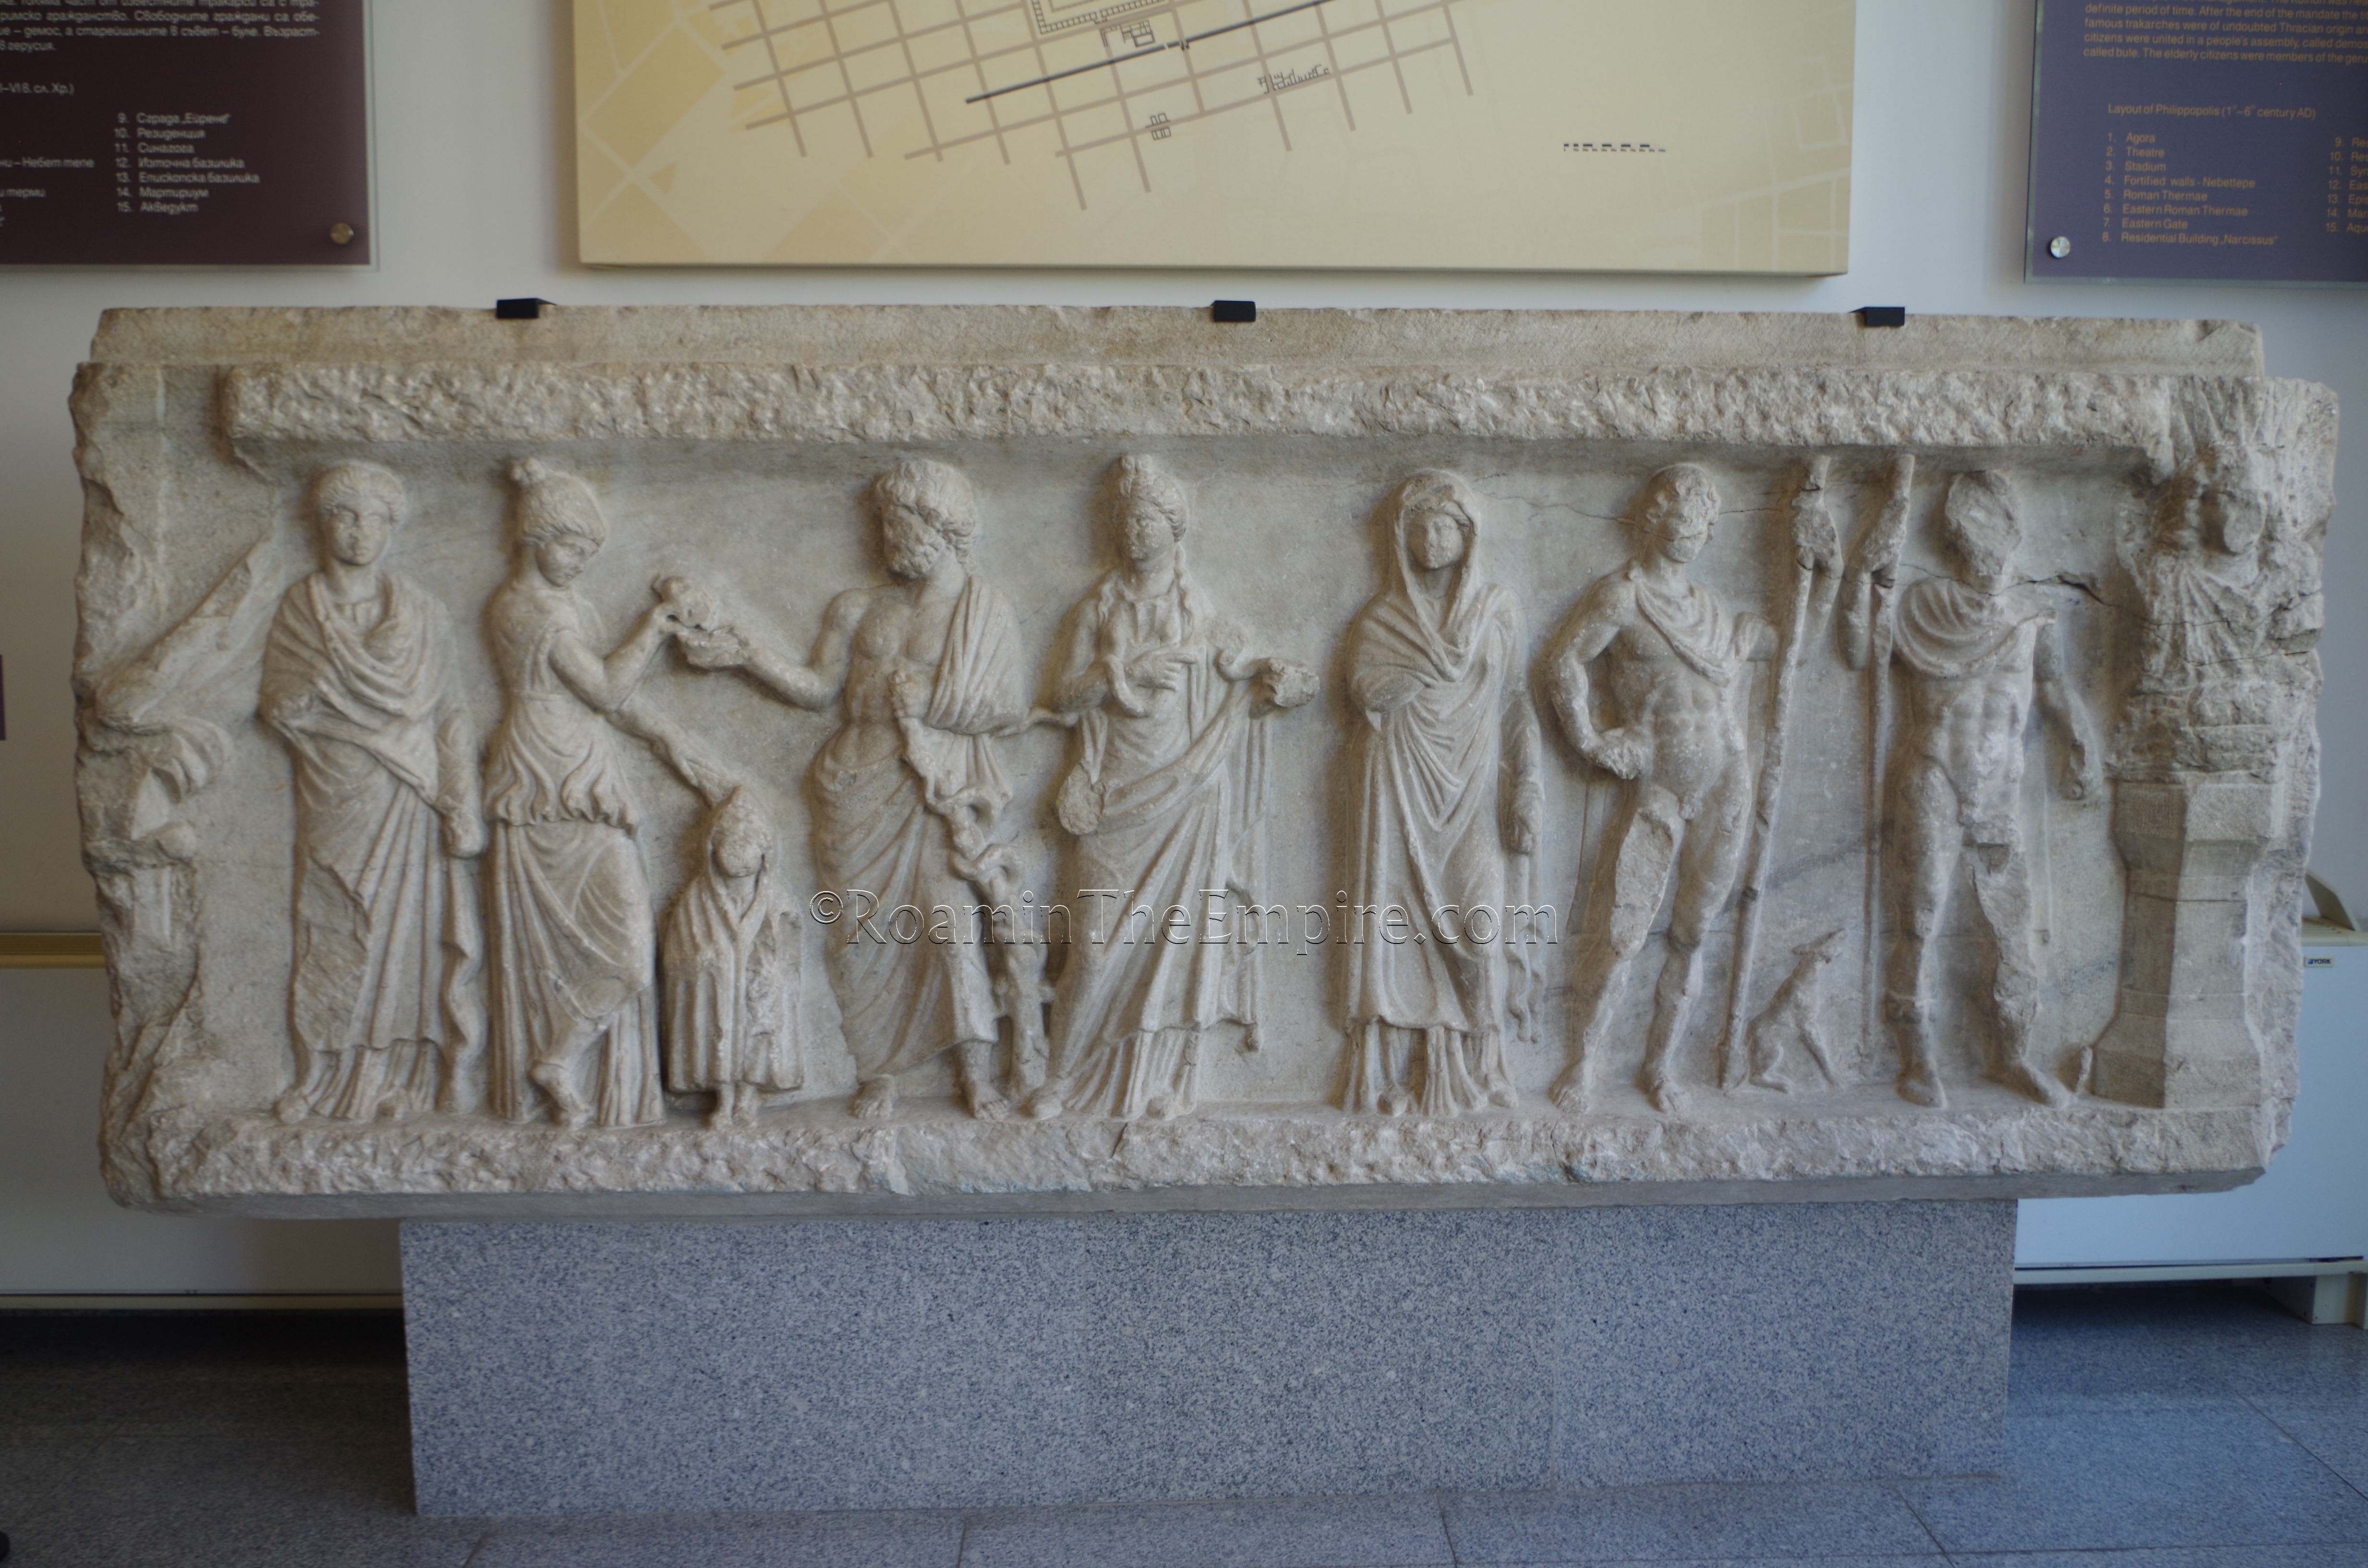 Frieze from a temple of health gods depicting Iaso, Panacea, Telesphorus, Asclepius, Hygieia, Epione, Machaon, and Podalirius. Found at Tsar Shishman Square in Plovdiv and dated to the 3rd century CE. Regional Archaeological Museum.